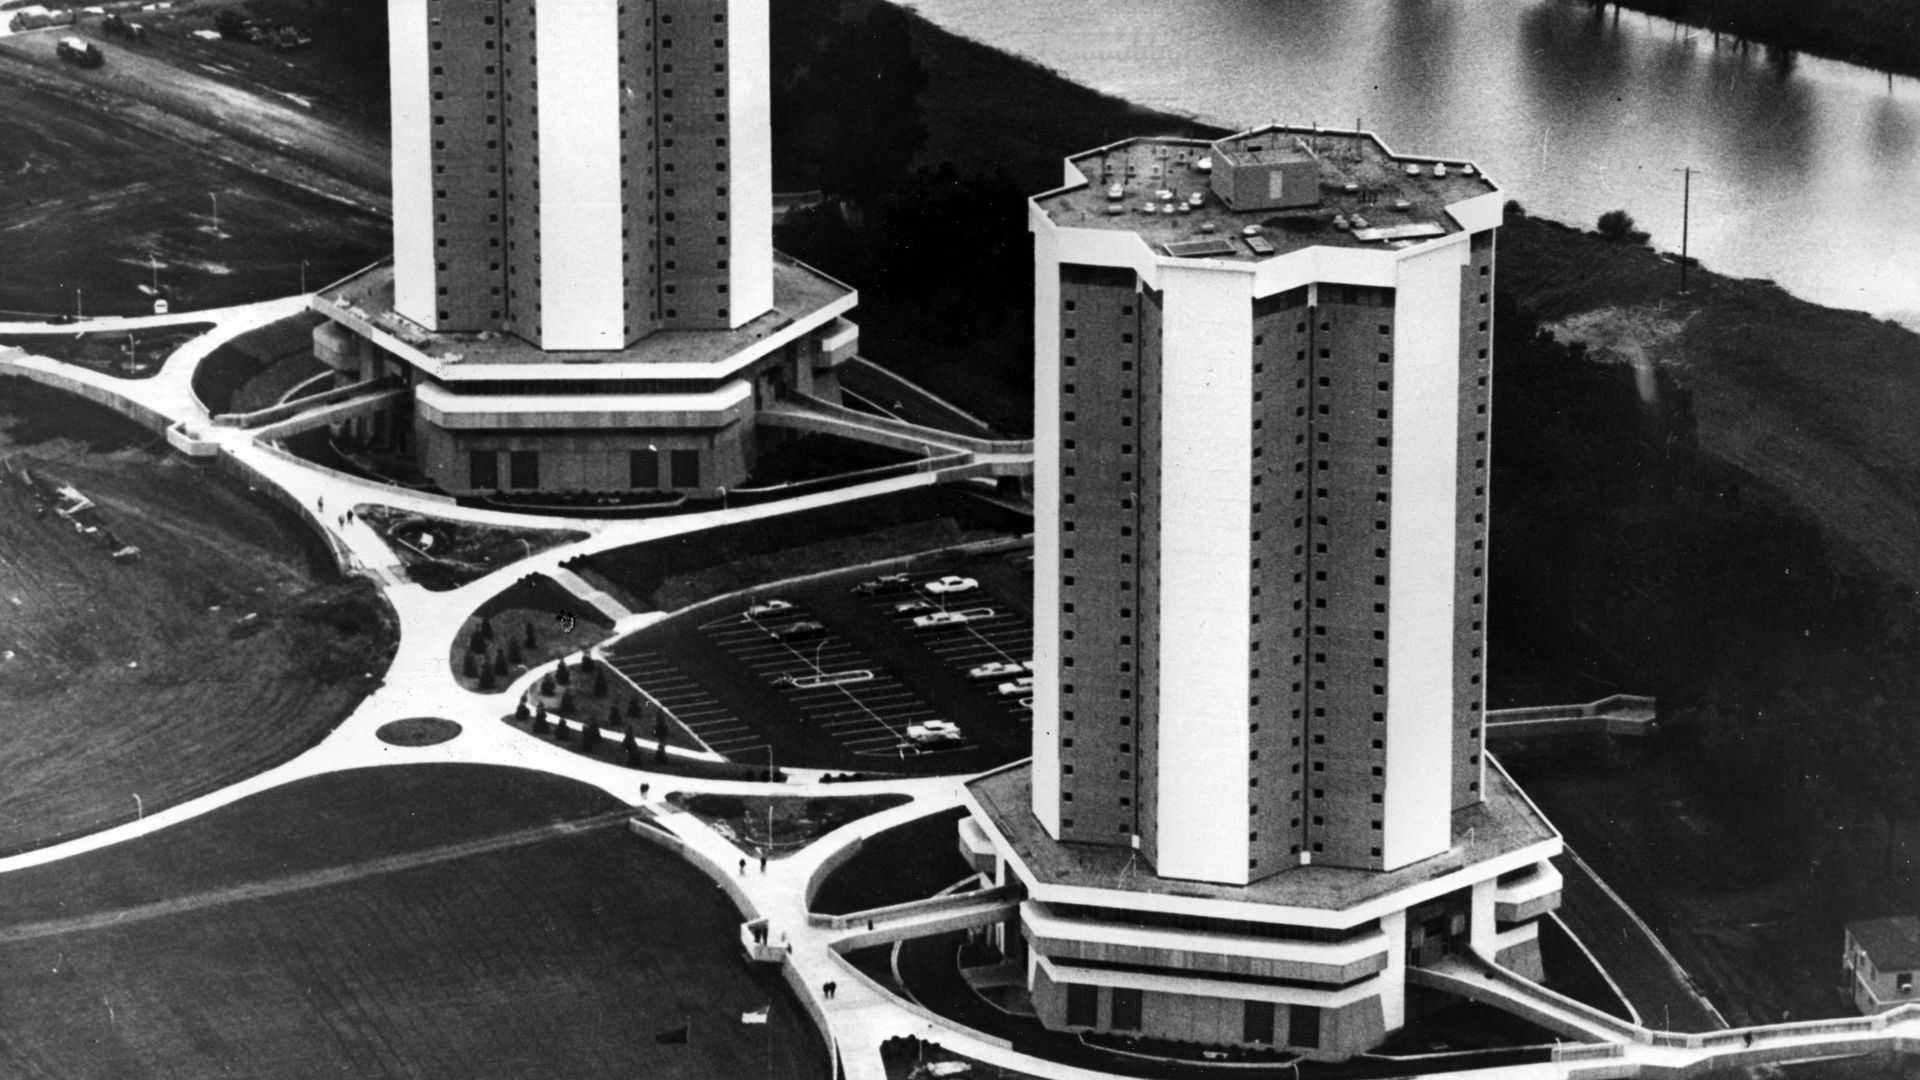 A bird's eye view of two tall residence halls on the campus of Ohio State University, seen in 1968.